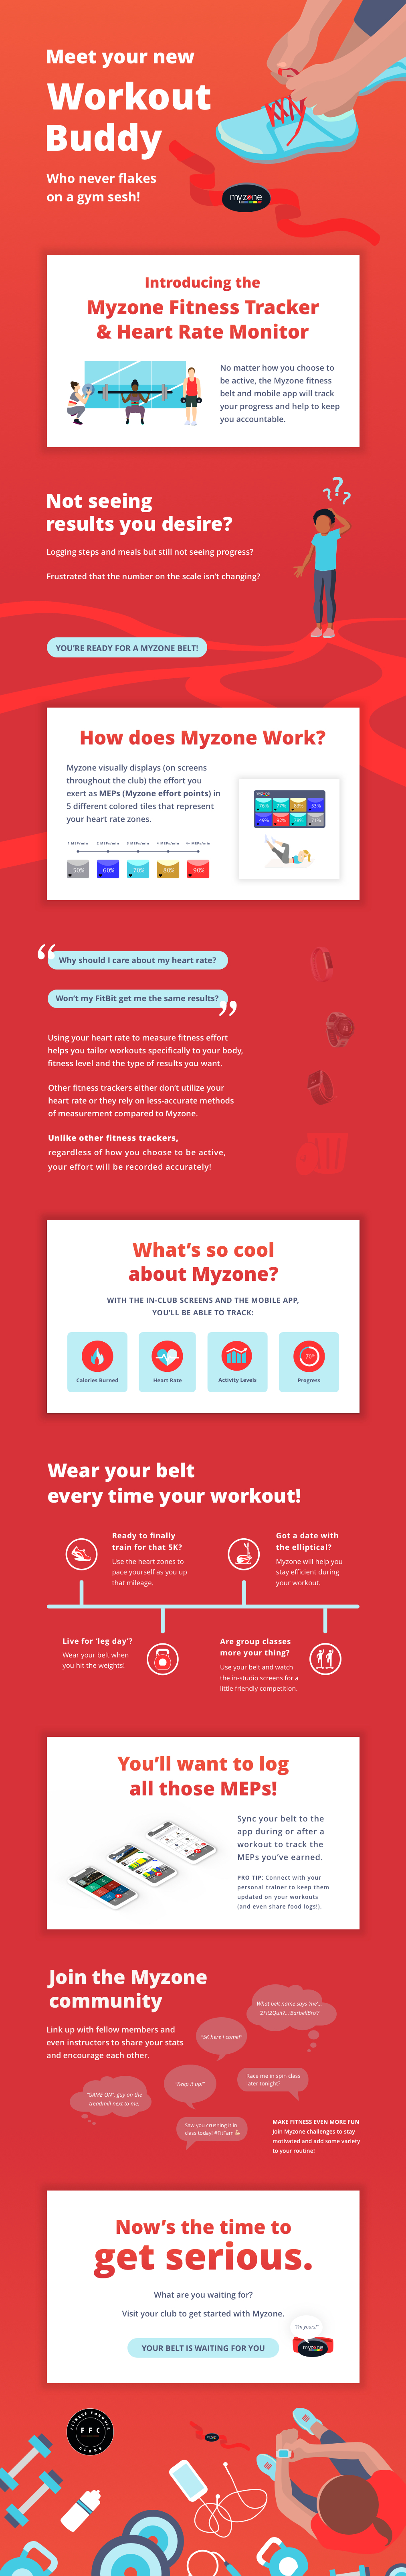 Mzyone heart rate tracker and monitor infographic.